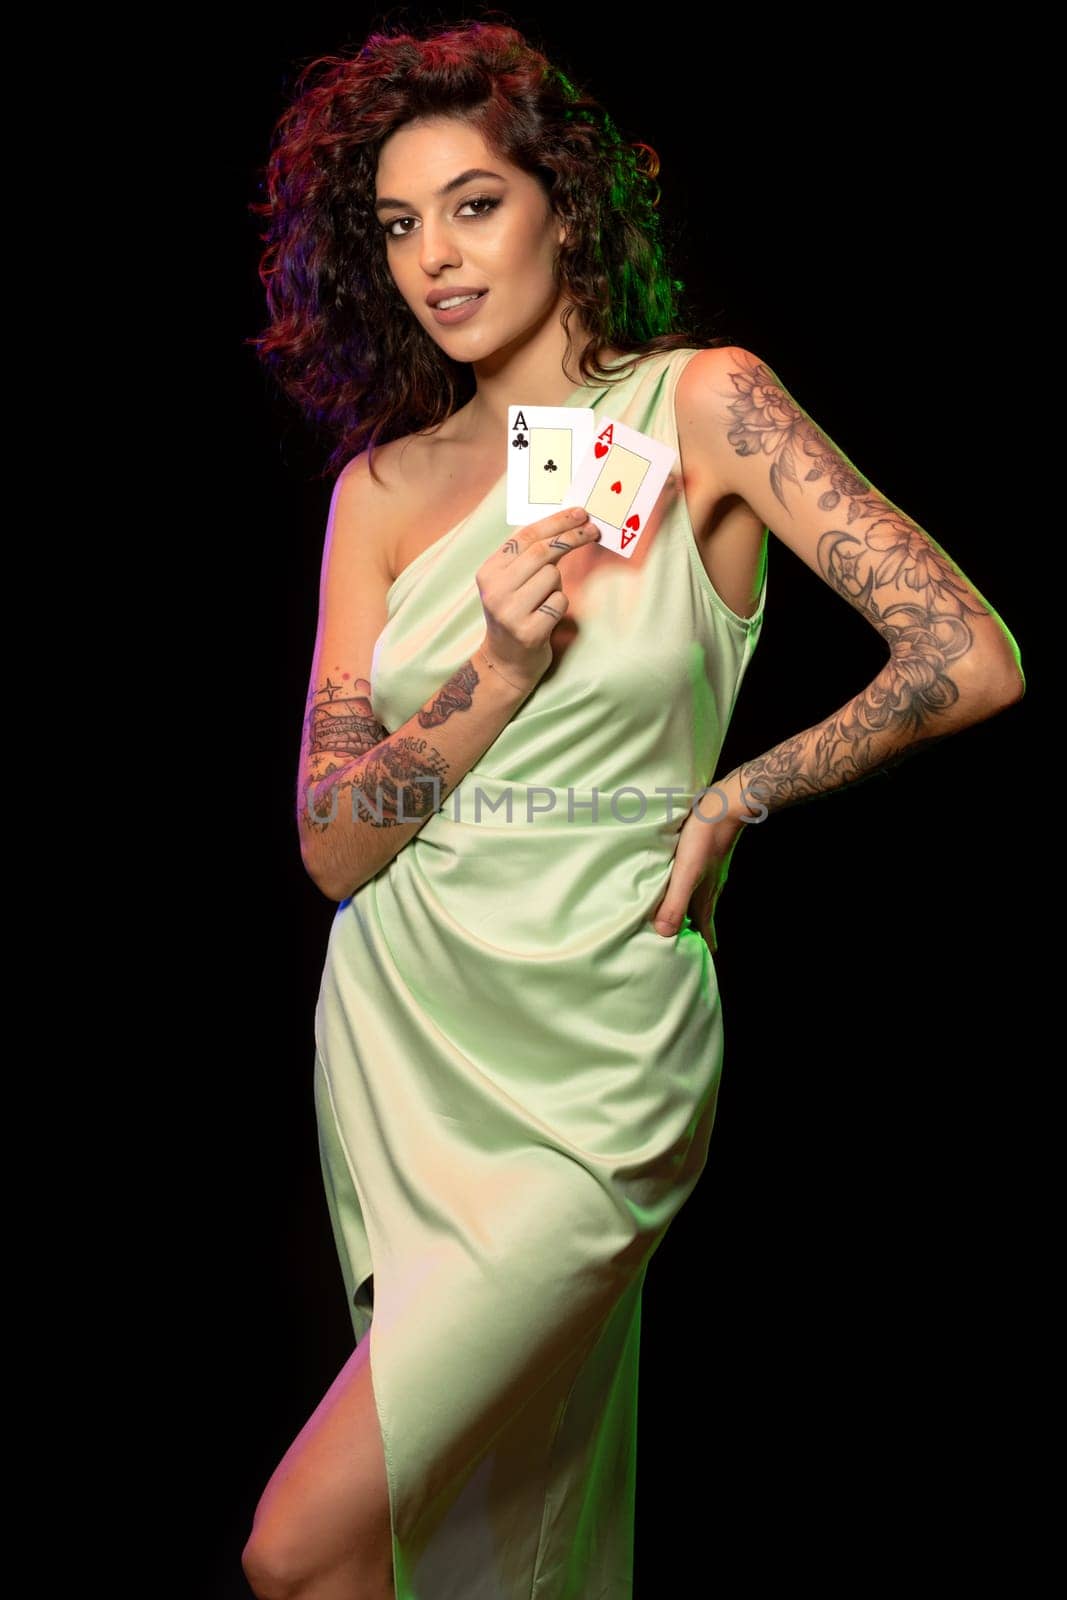 Smiling young female poker player holding pair of aces with winner look by nazarovsergey